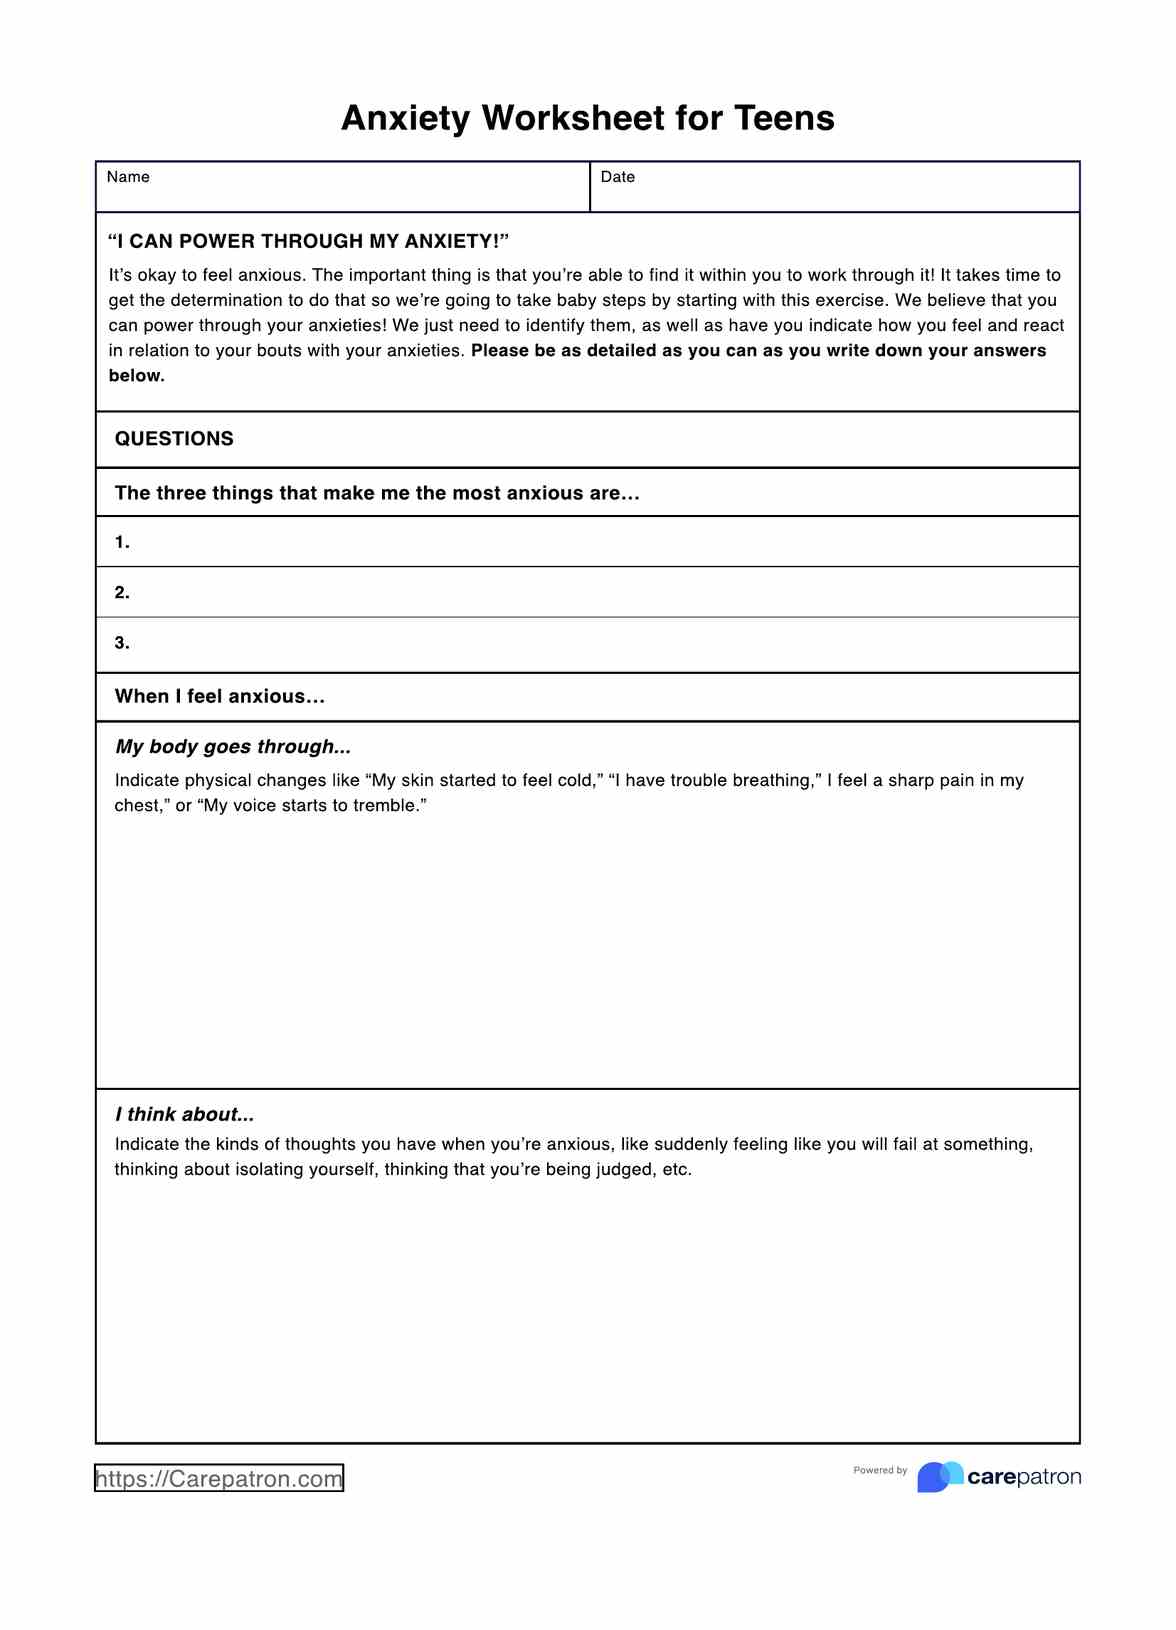 Anxiety Worksheets For Teens PDF Example